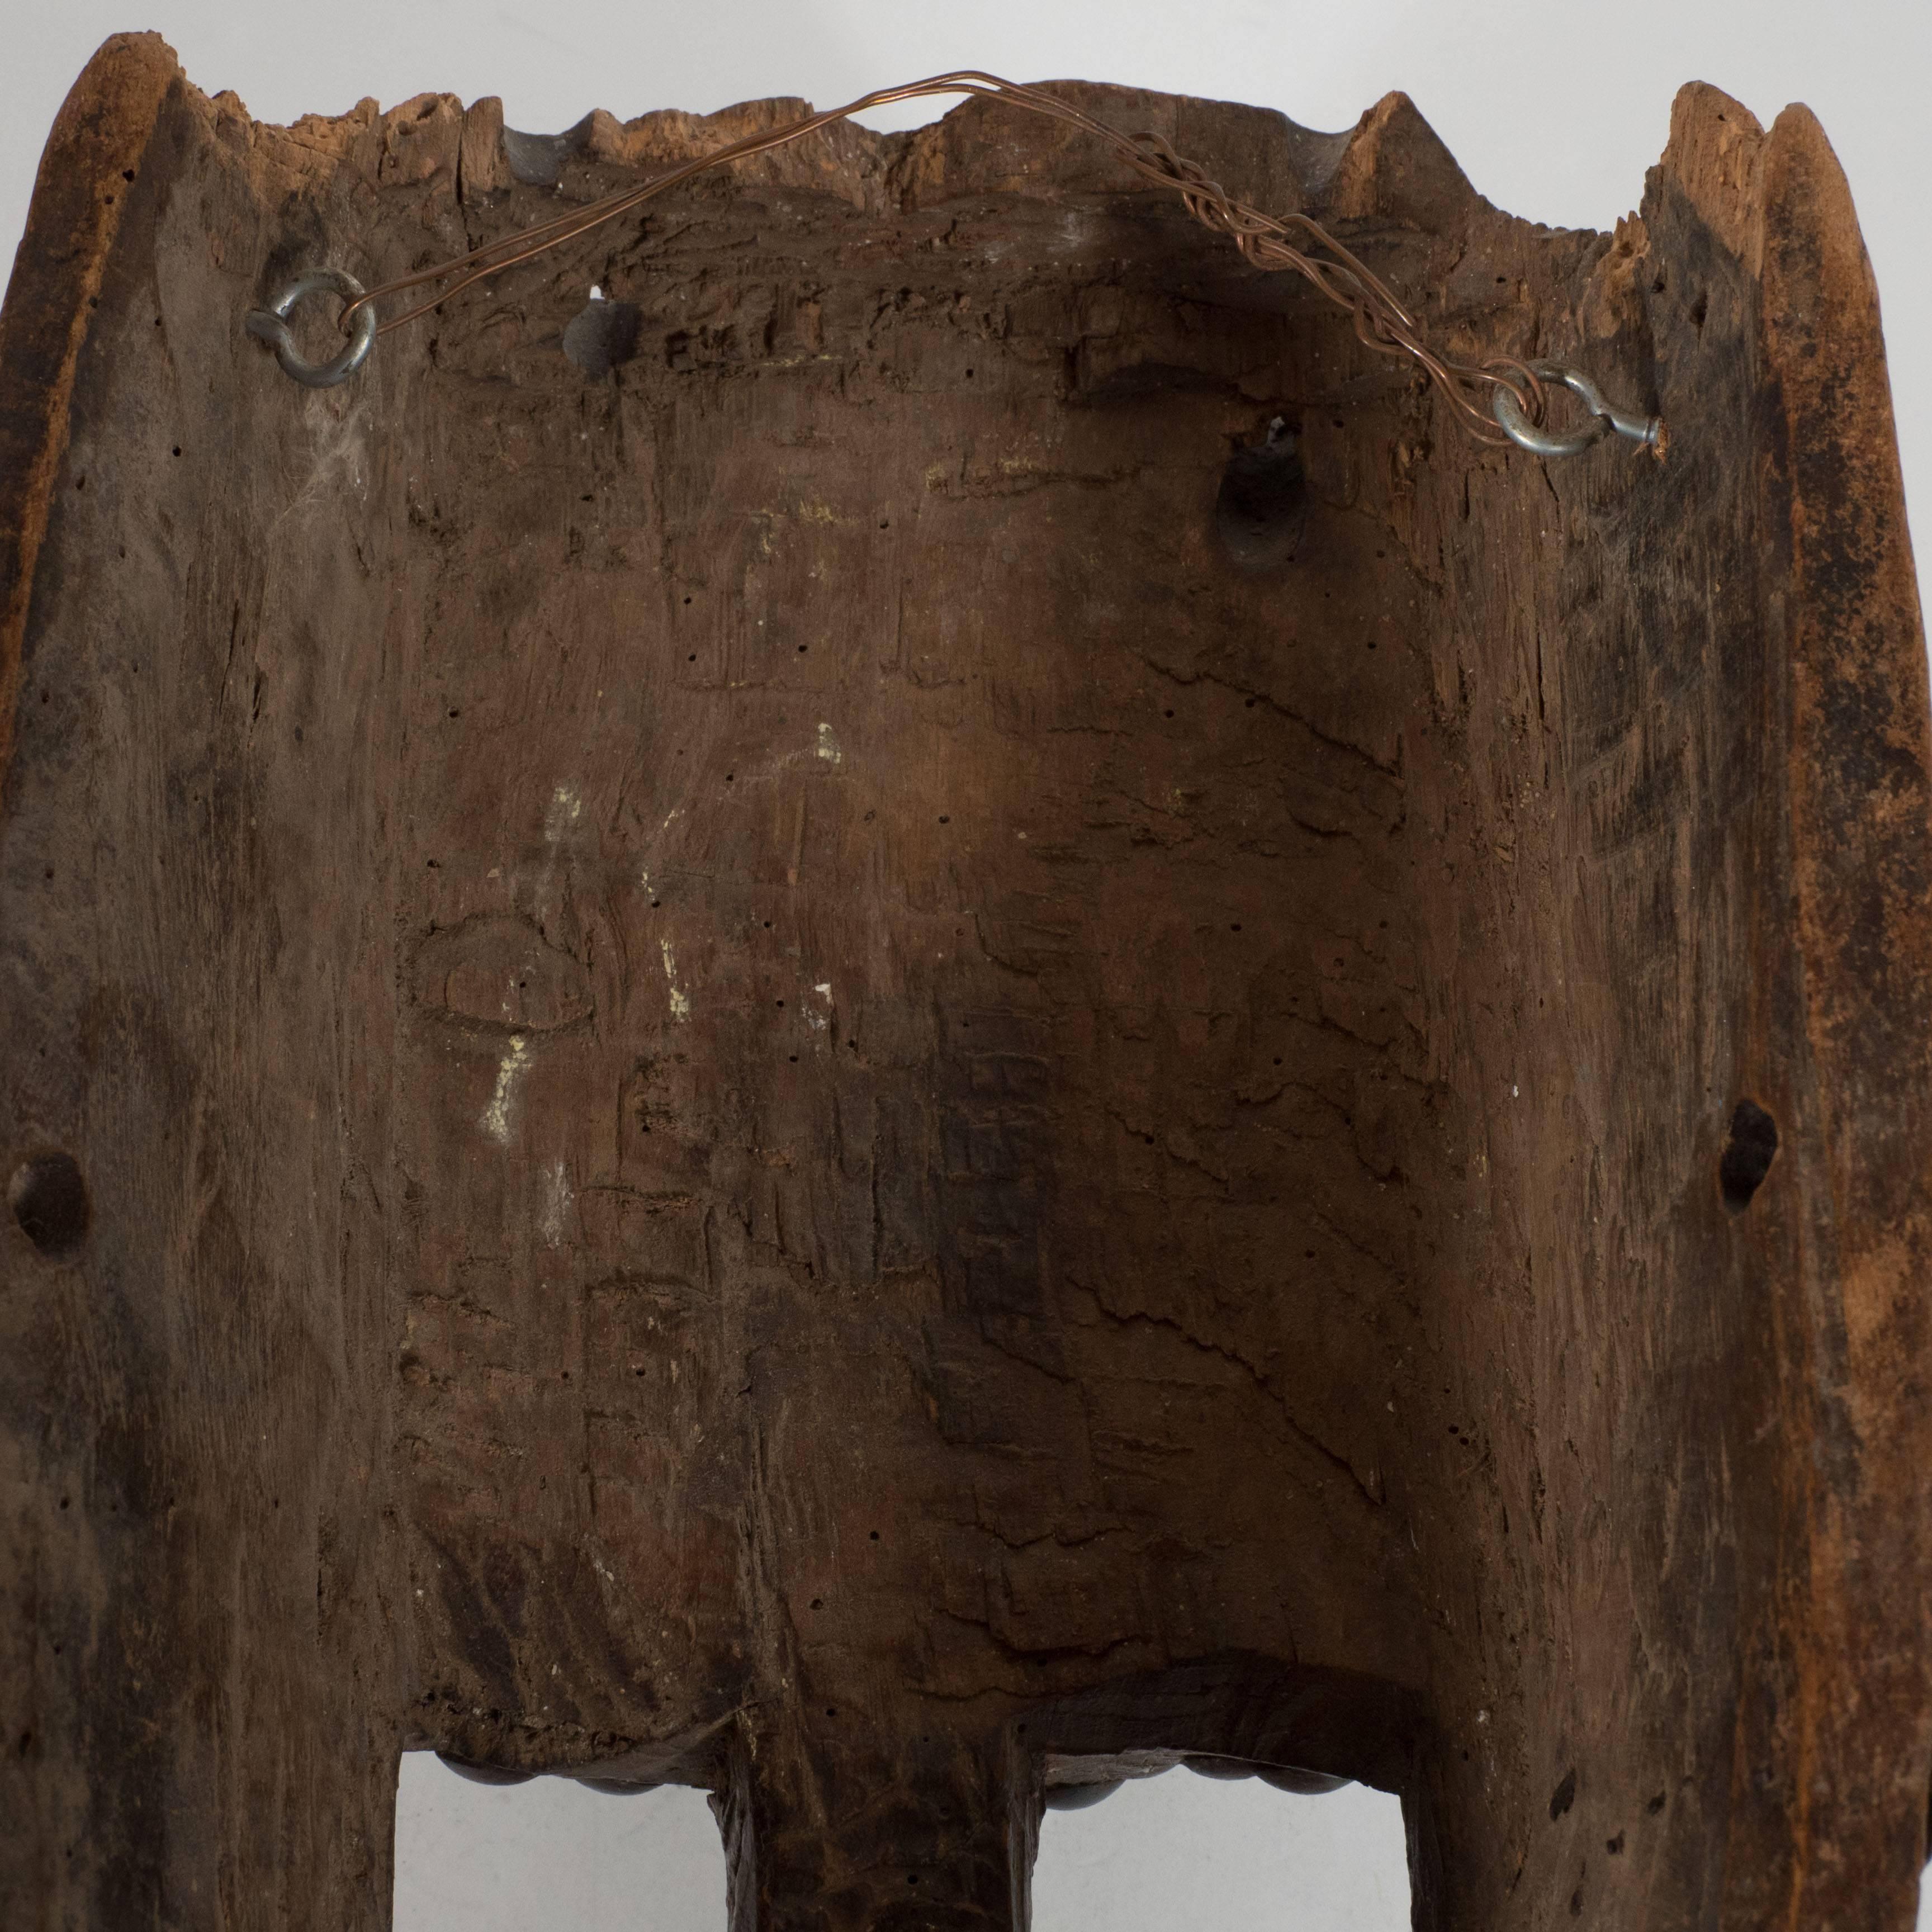 19th Century African Marka Mask from Mali Authenticated by Sotheby's 1